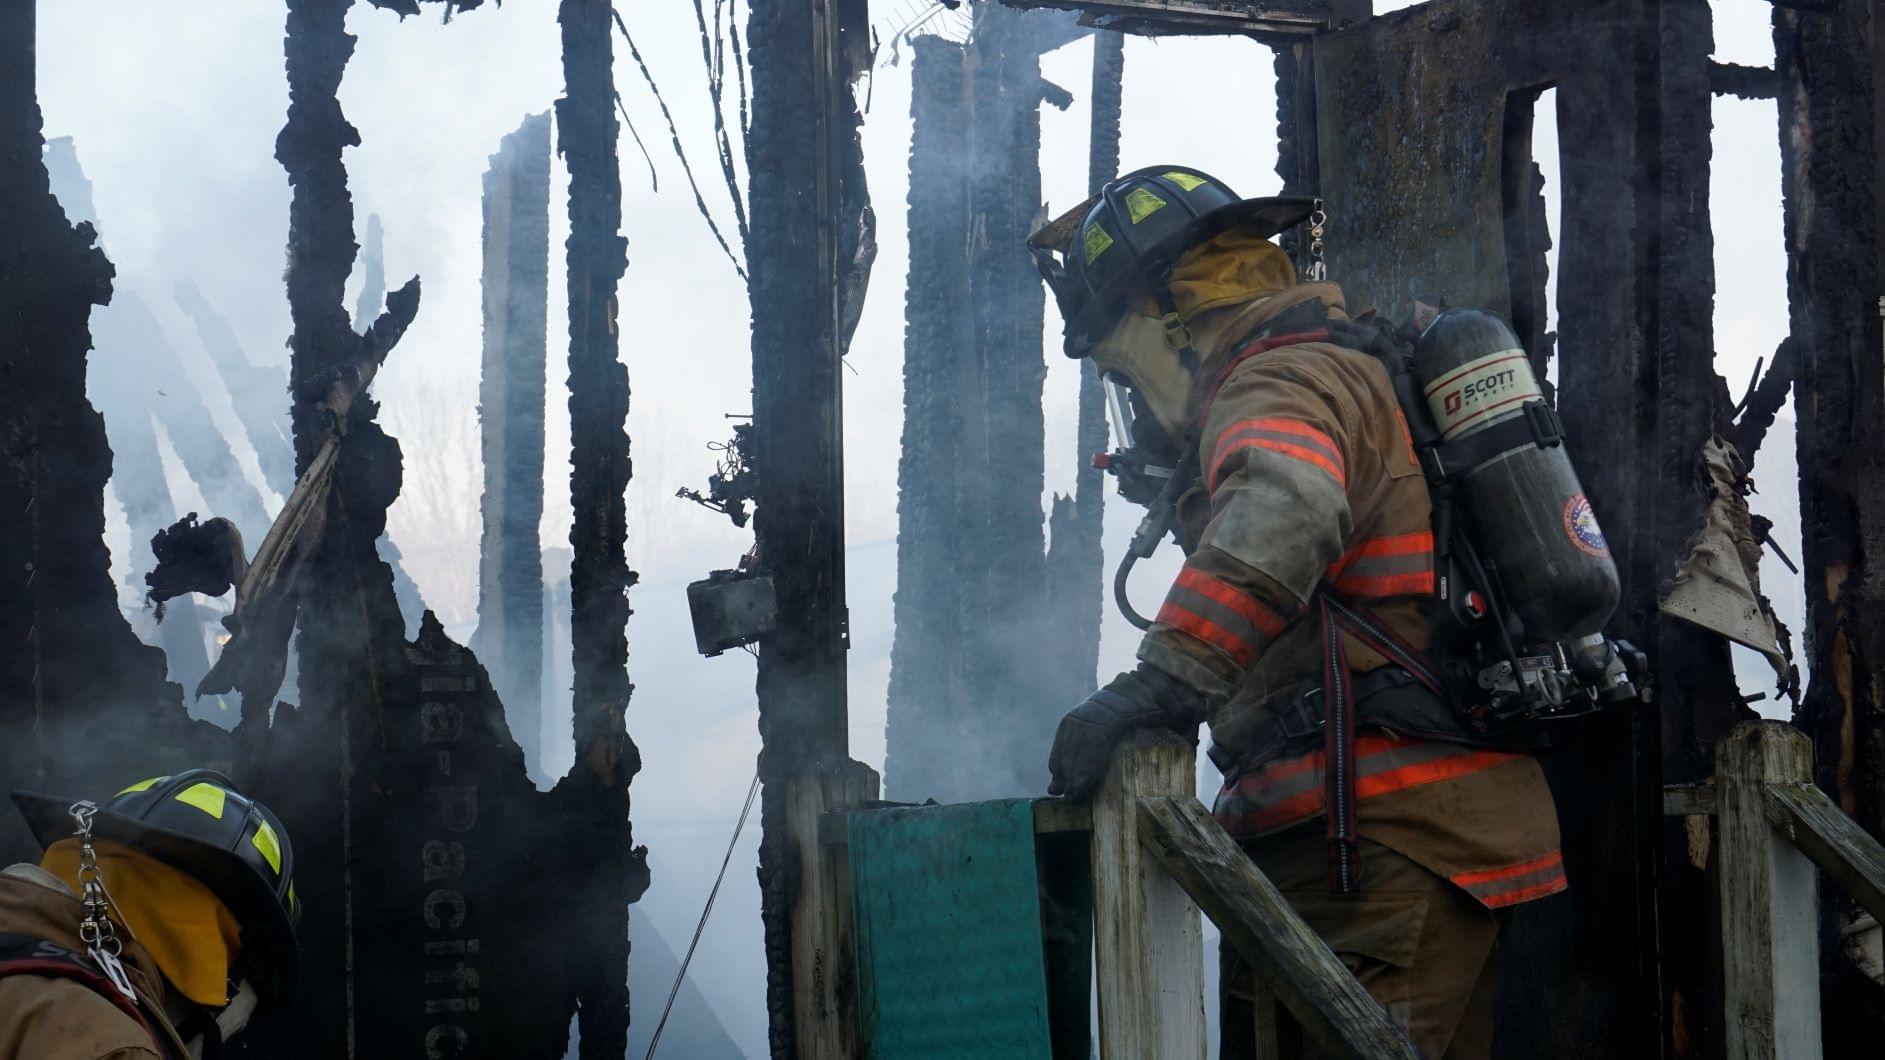 Duplin County Mobile Home Goes Up In Flames (PHOTO GALERY)